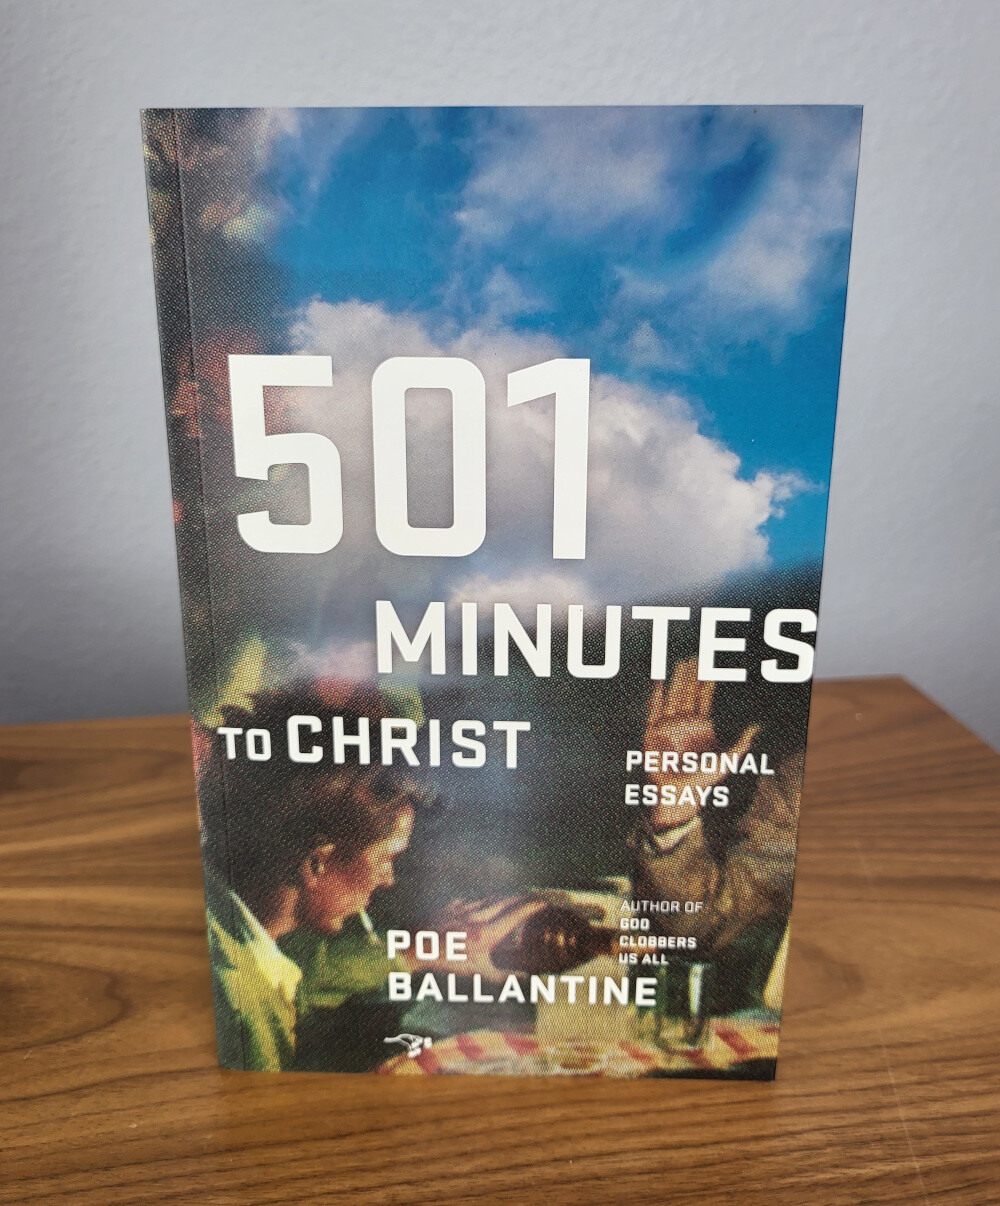 501 Minutes to Christ: Personal Essays by Poe Ballantine